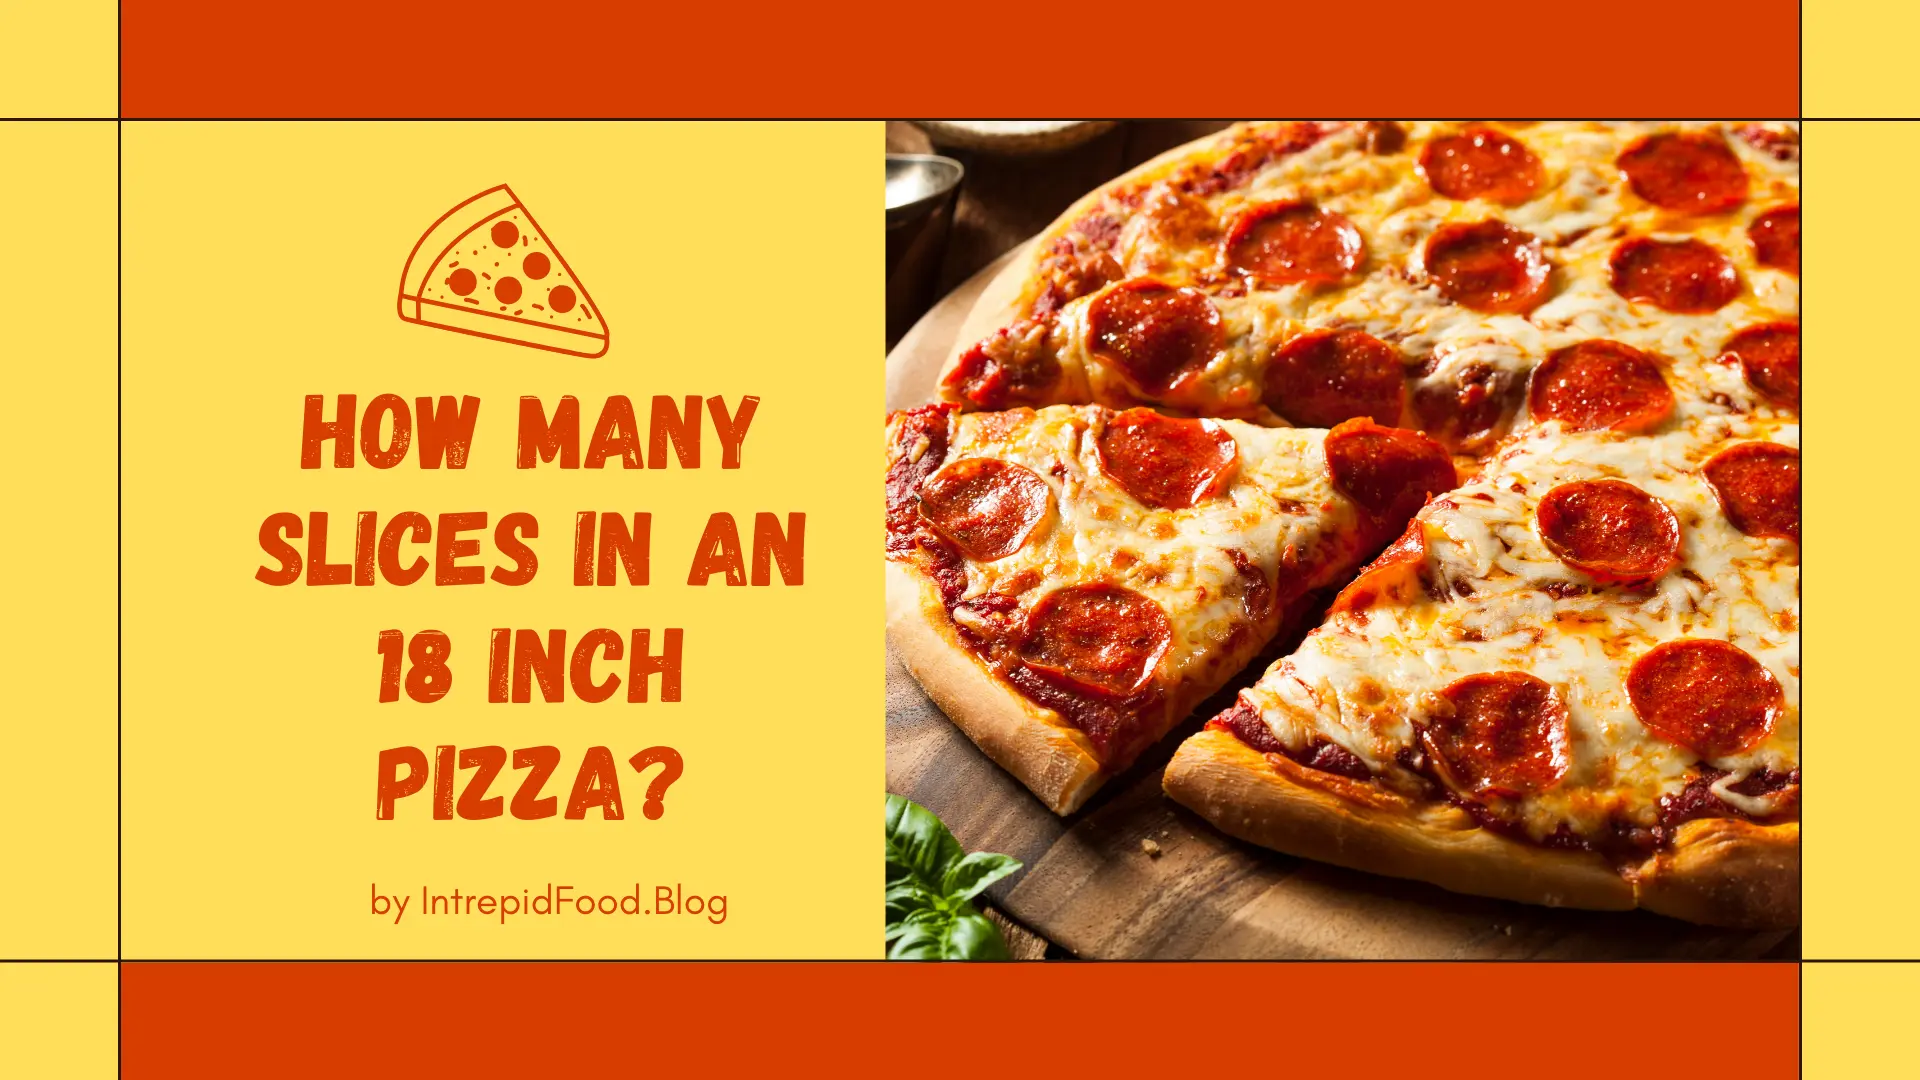 How Many Slices in an 18 Inch Pizza